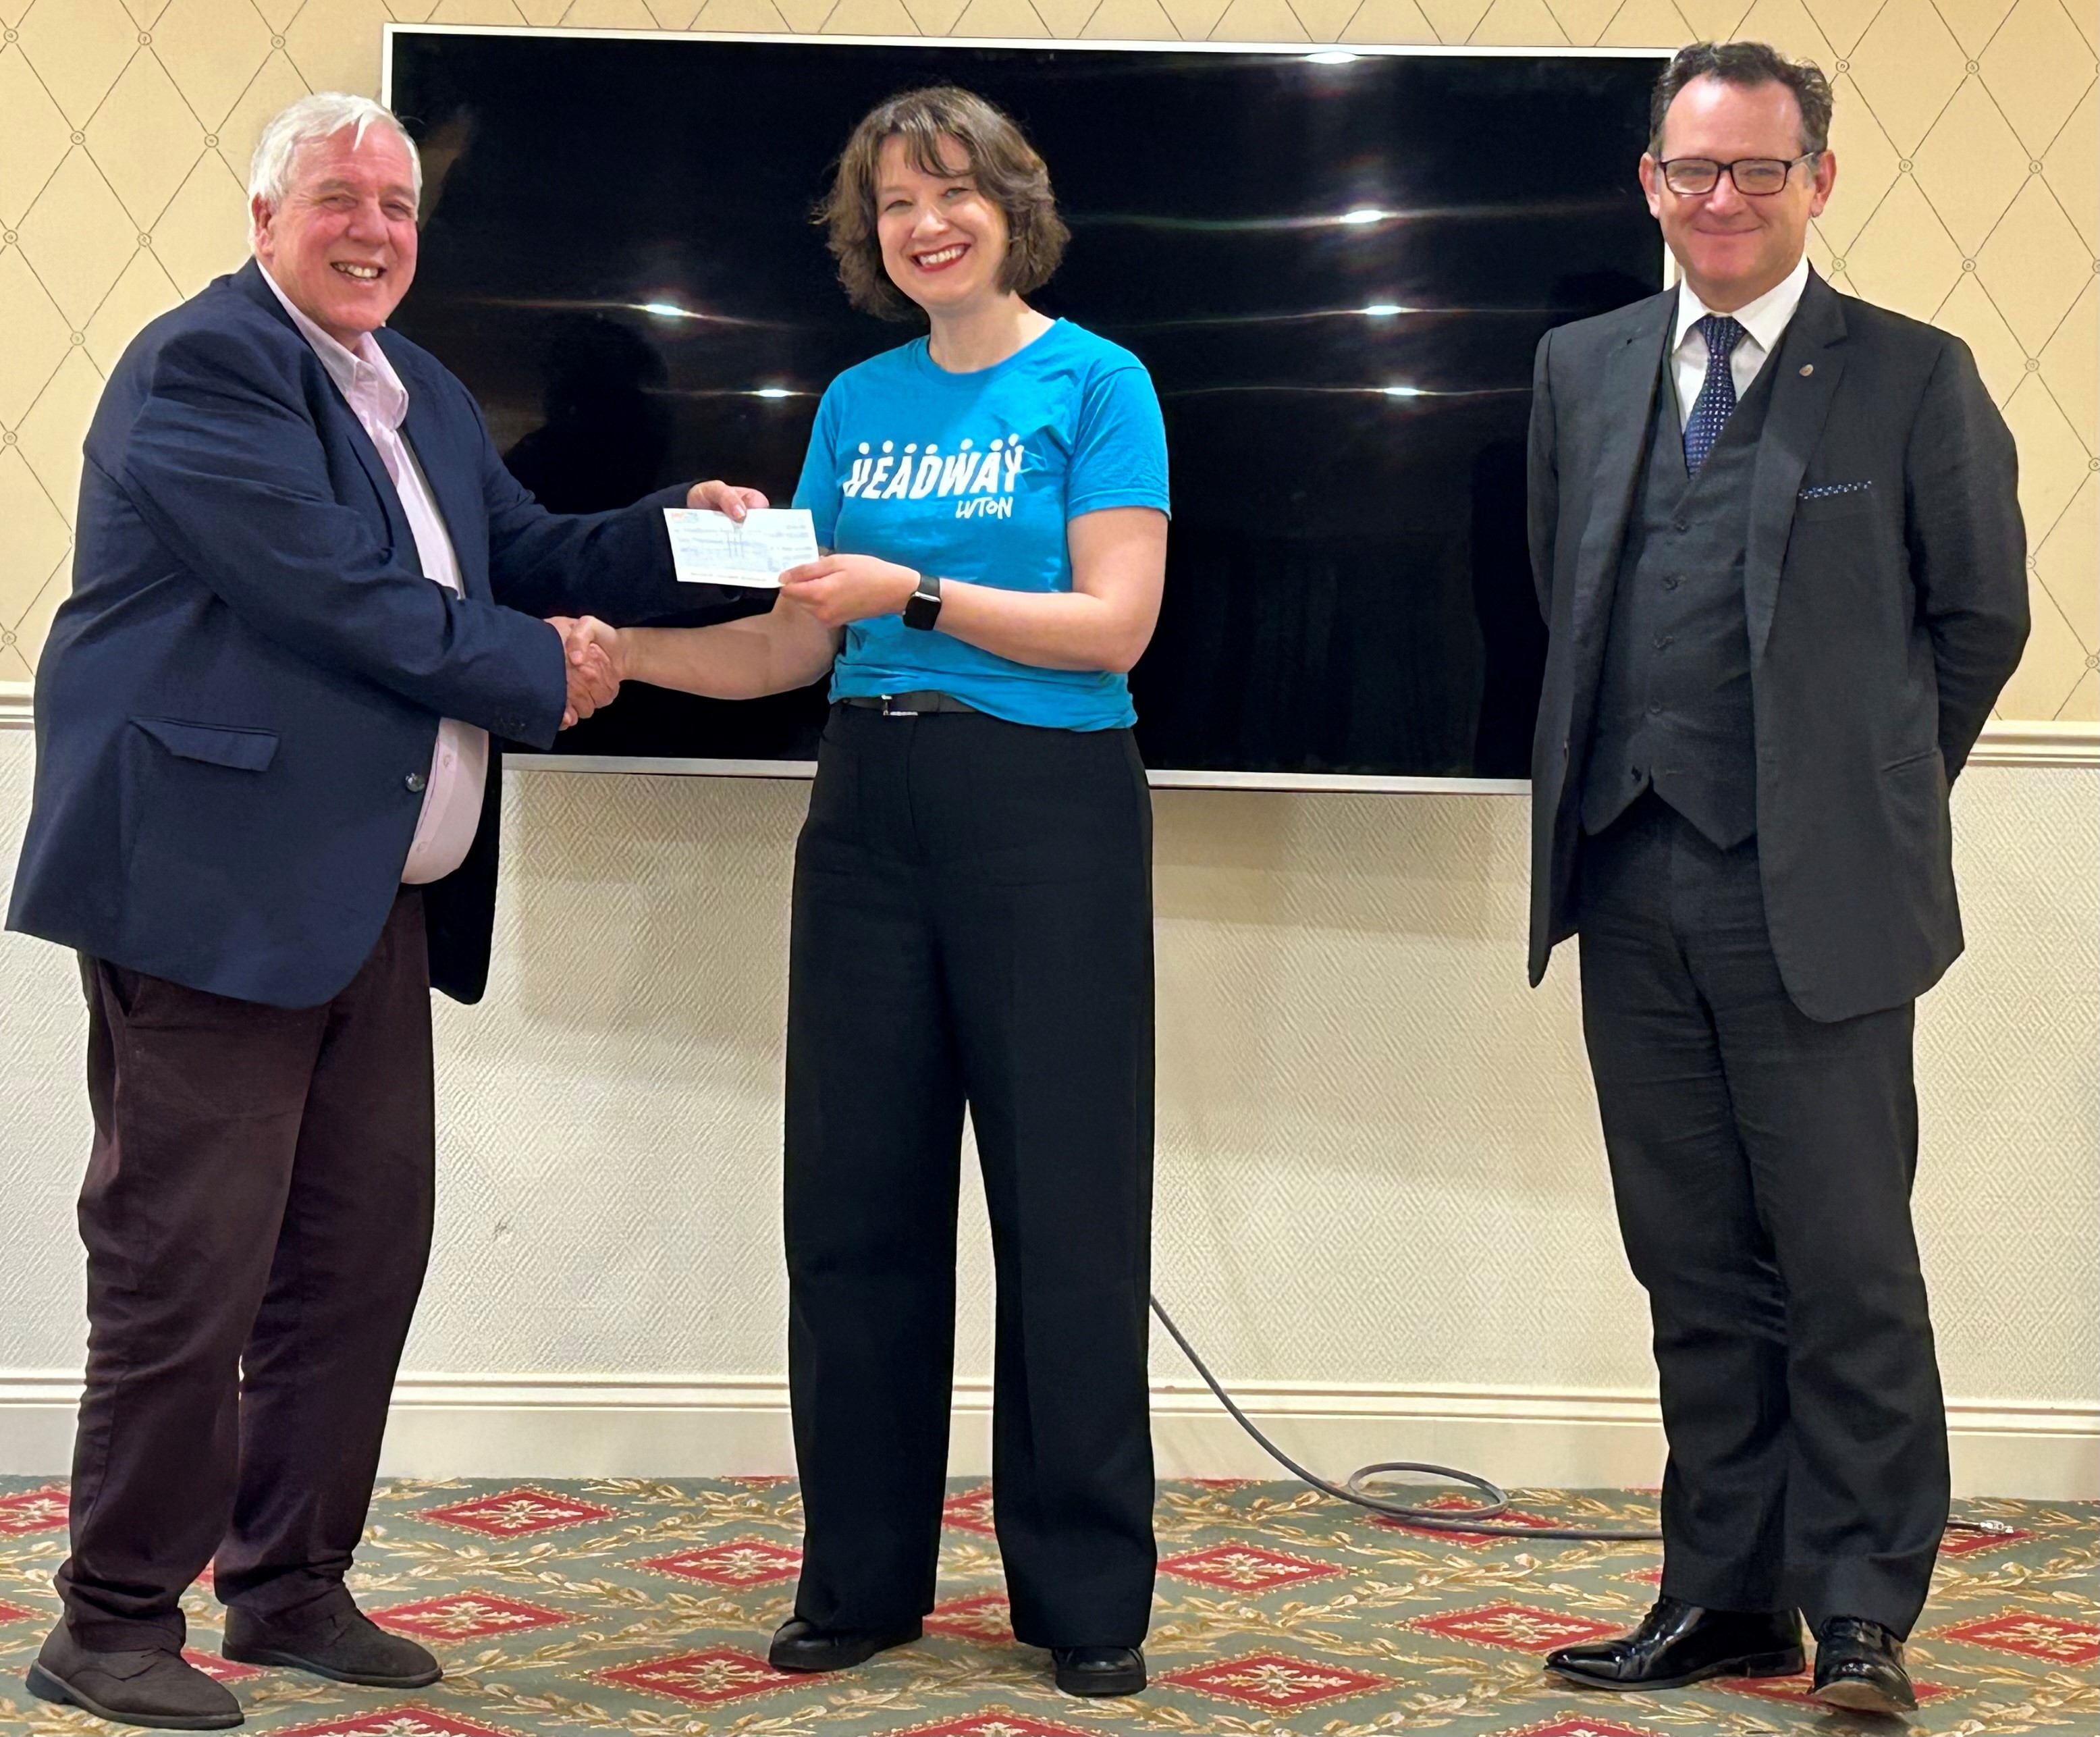 Staff member from Headway Luton is presented with a cheque for £1000 from Ron, owner of Collaborate network. They are standing in front of a very large TV in Luton Hoo.